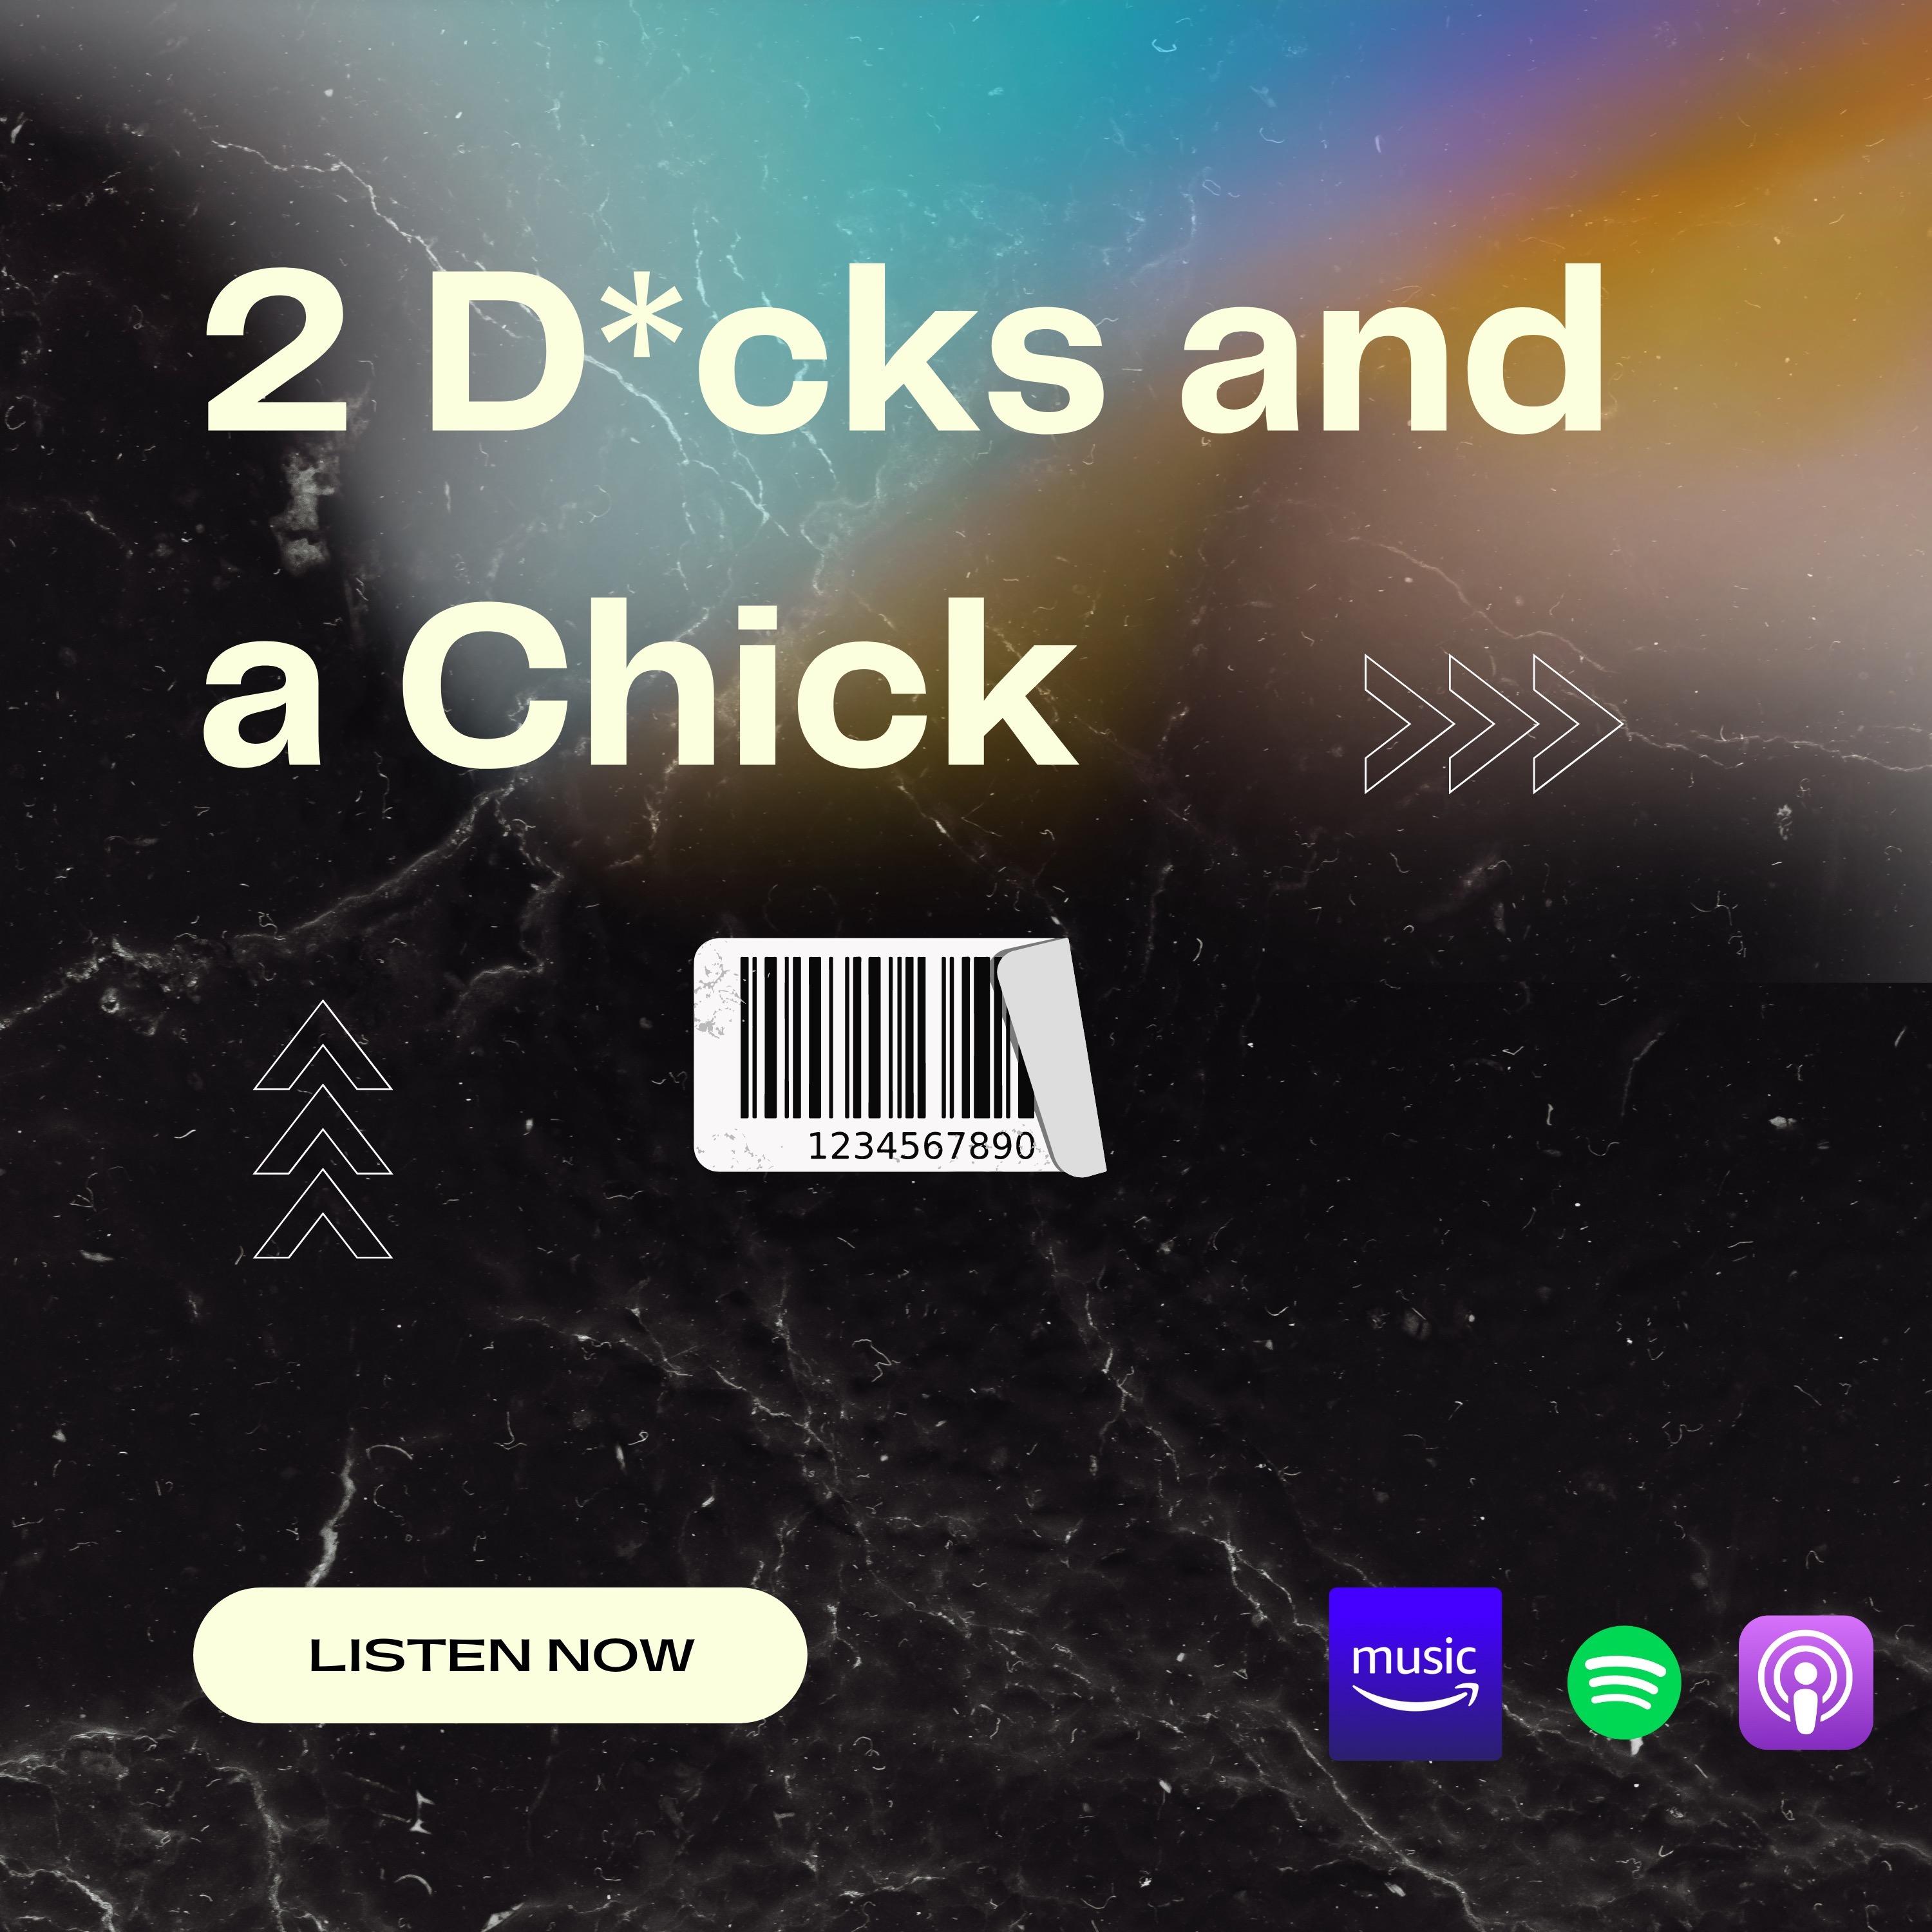 23 Gang Music Presents 2 D*cks and a Chick 